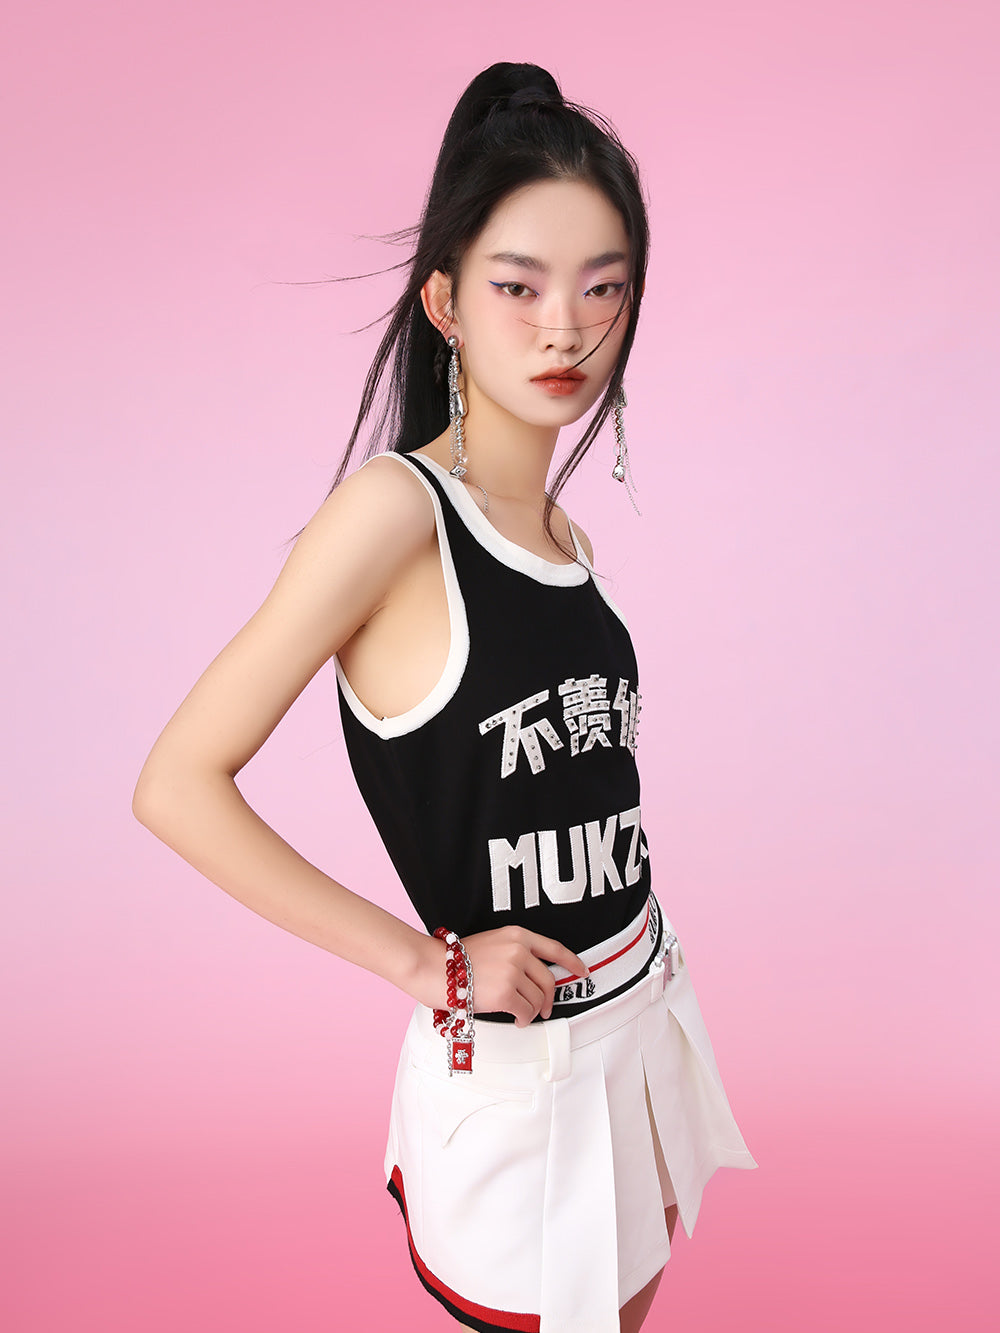 MUKZIN Chinese Characters Beading Look-thin Vest